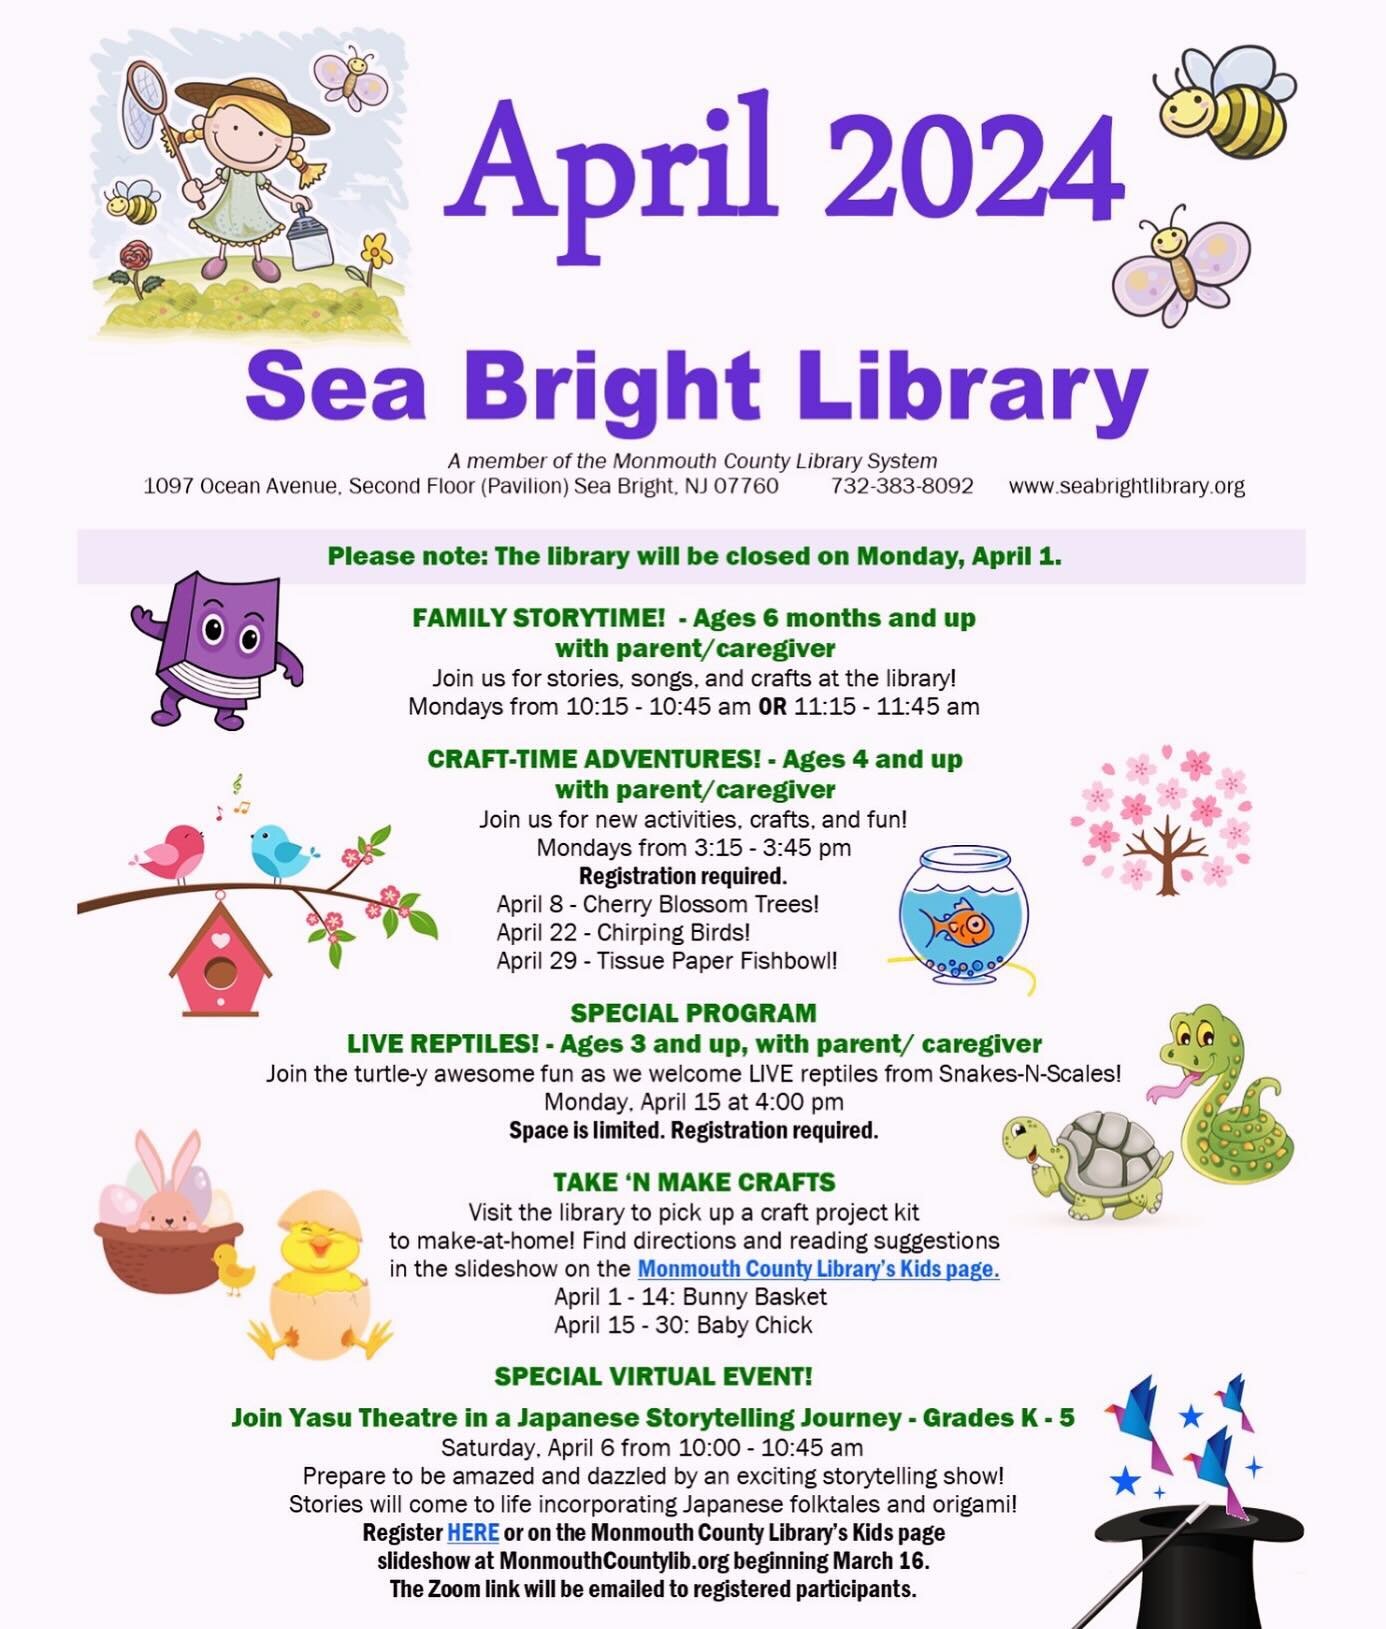 Lots of fun coming to the Sea Bright library this spring!